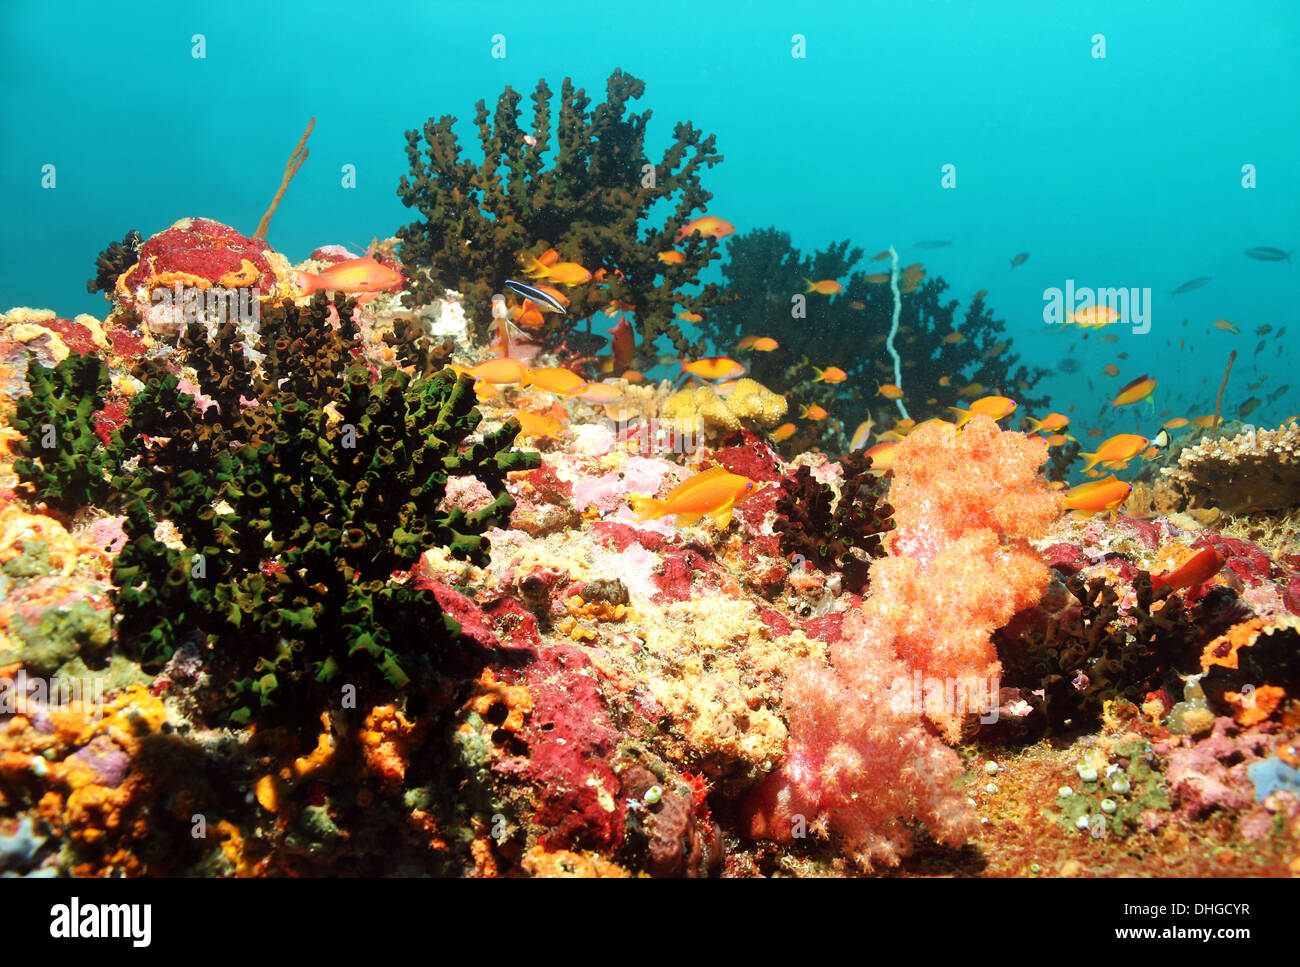 Coral Reef, South Male Atoll, Maldives Banque D'Images